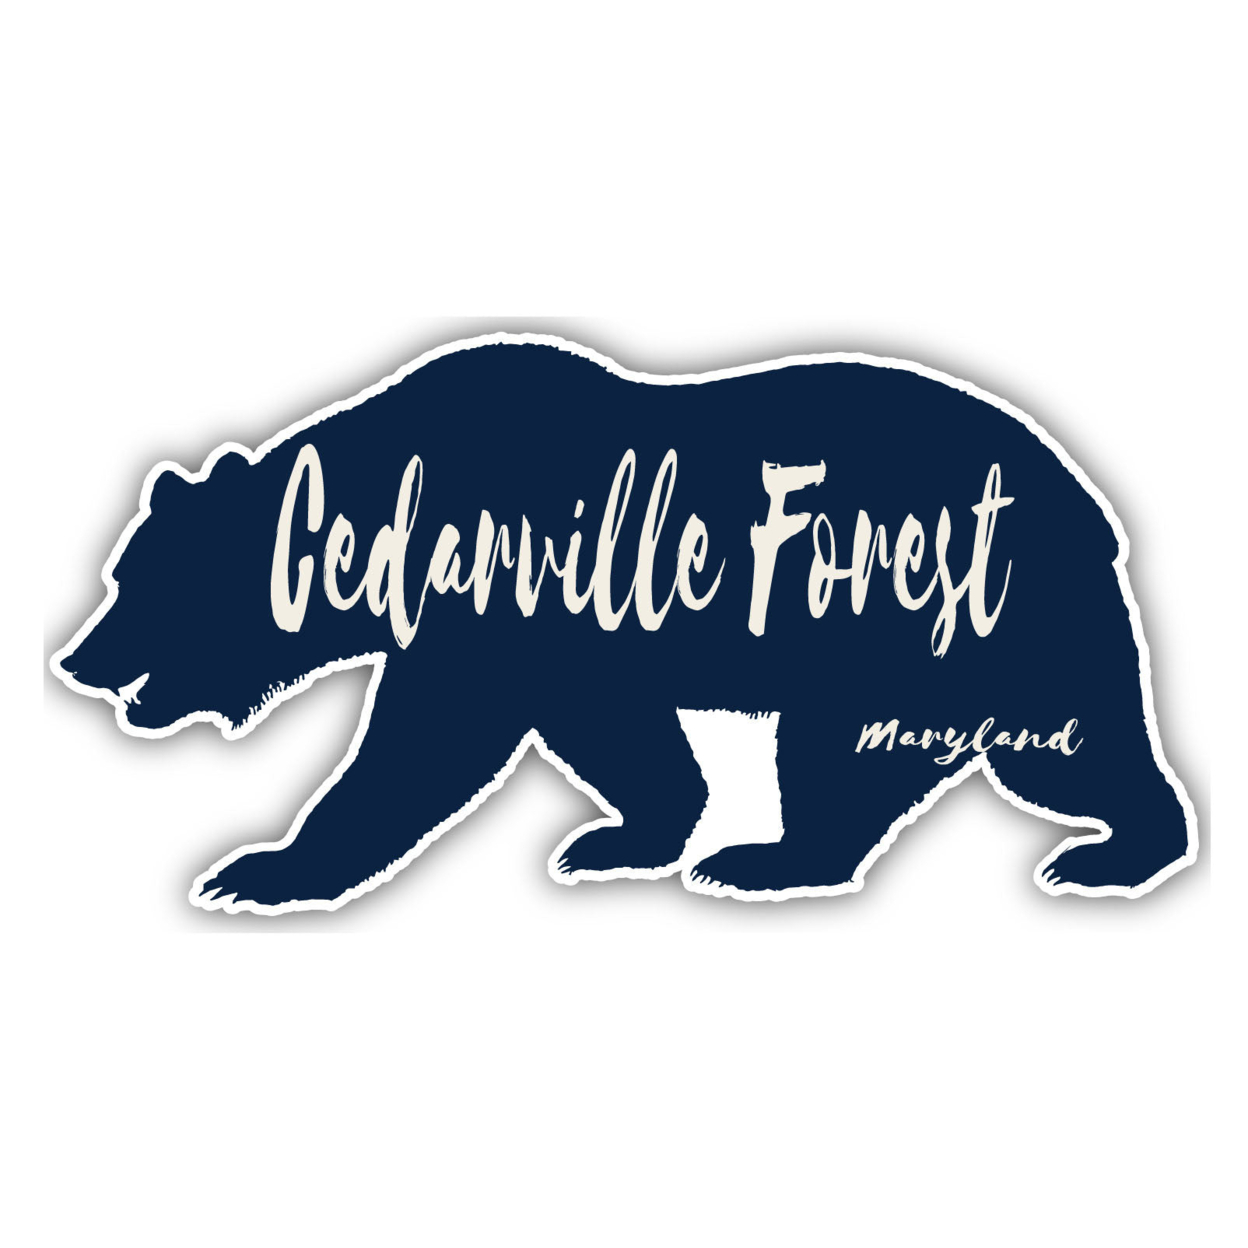 Cedarville Forest Maryland Souvenir Decorative Stickers (Choose Theme And Size) - 4-Pack, 2-Inch, Bear